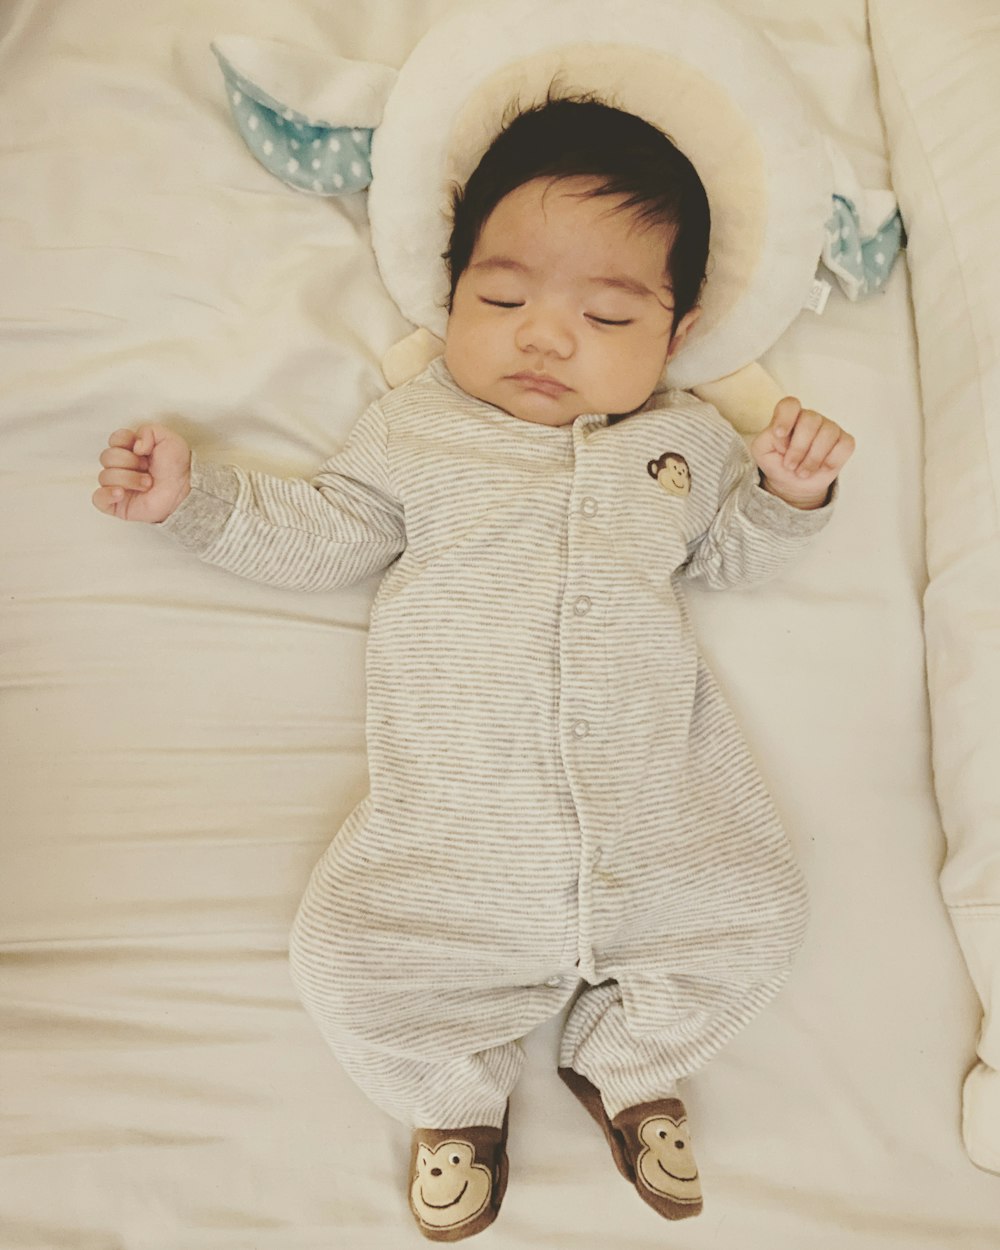 baby in white and green onesie lying on white textile